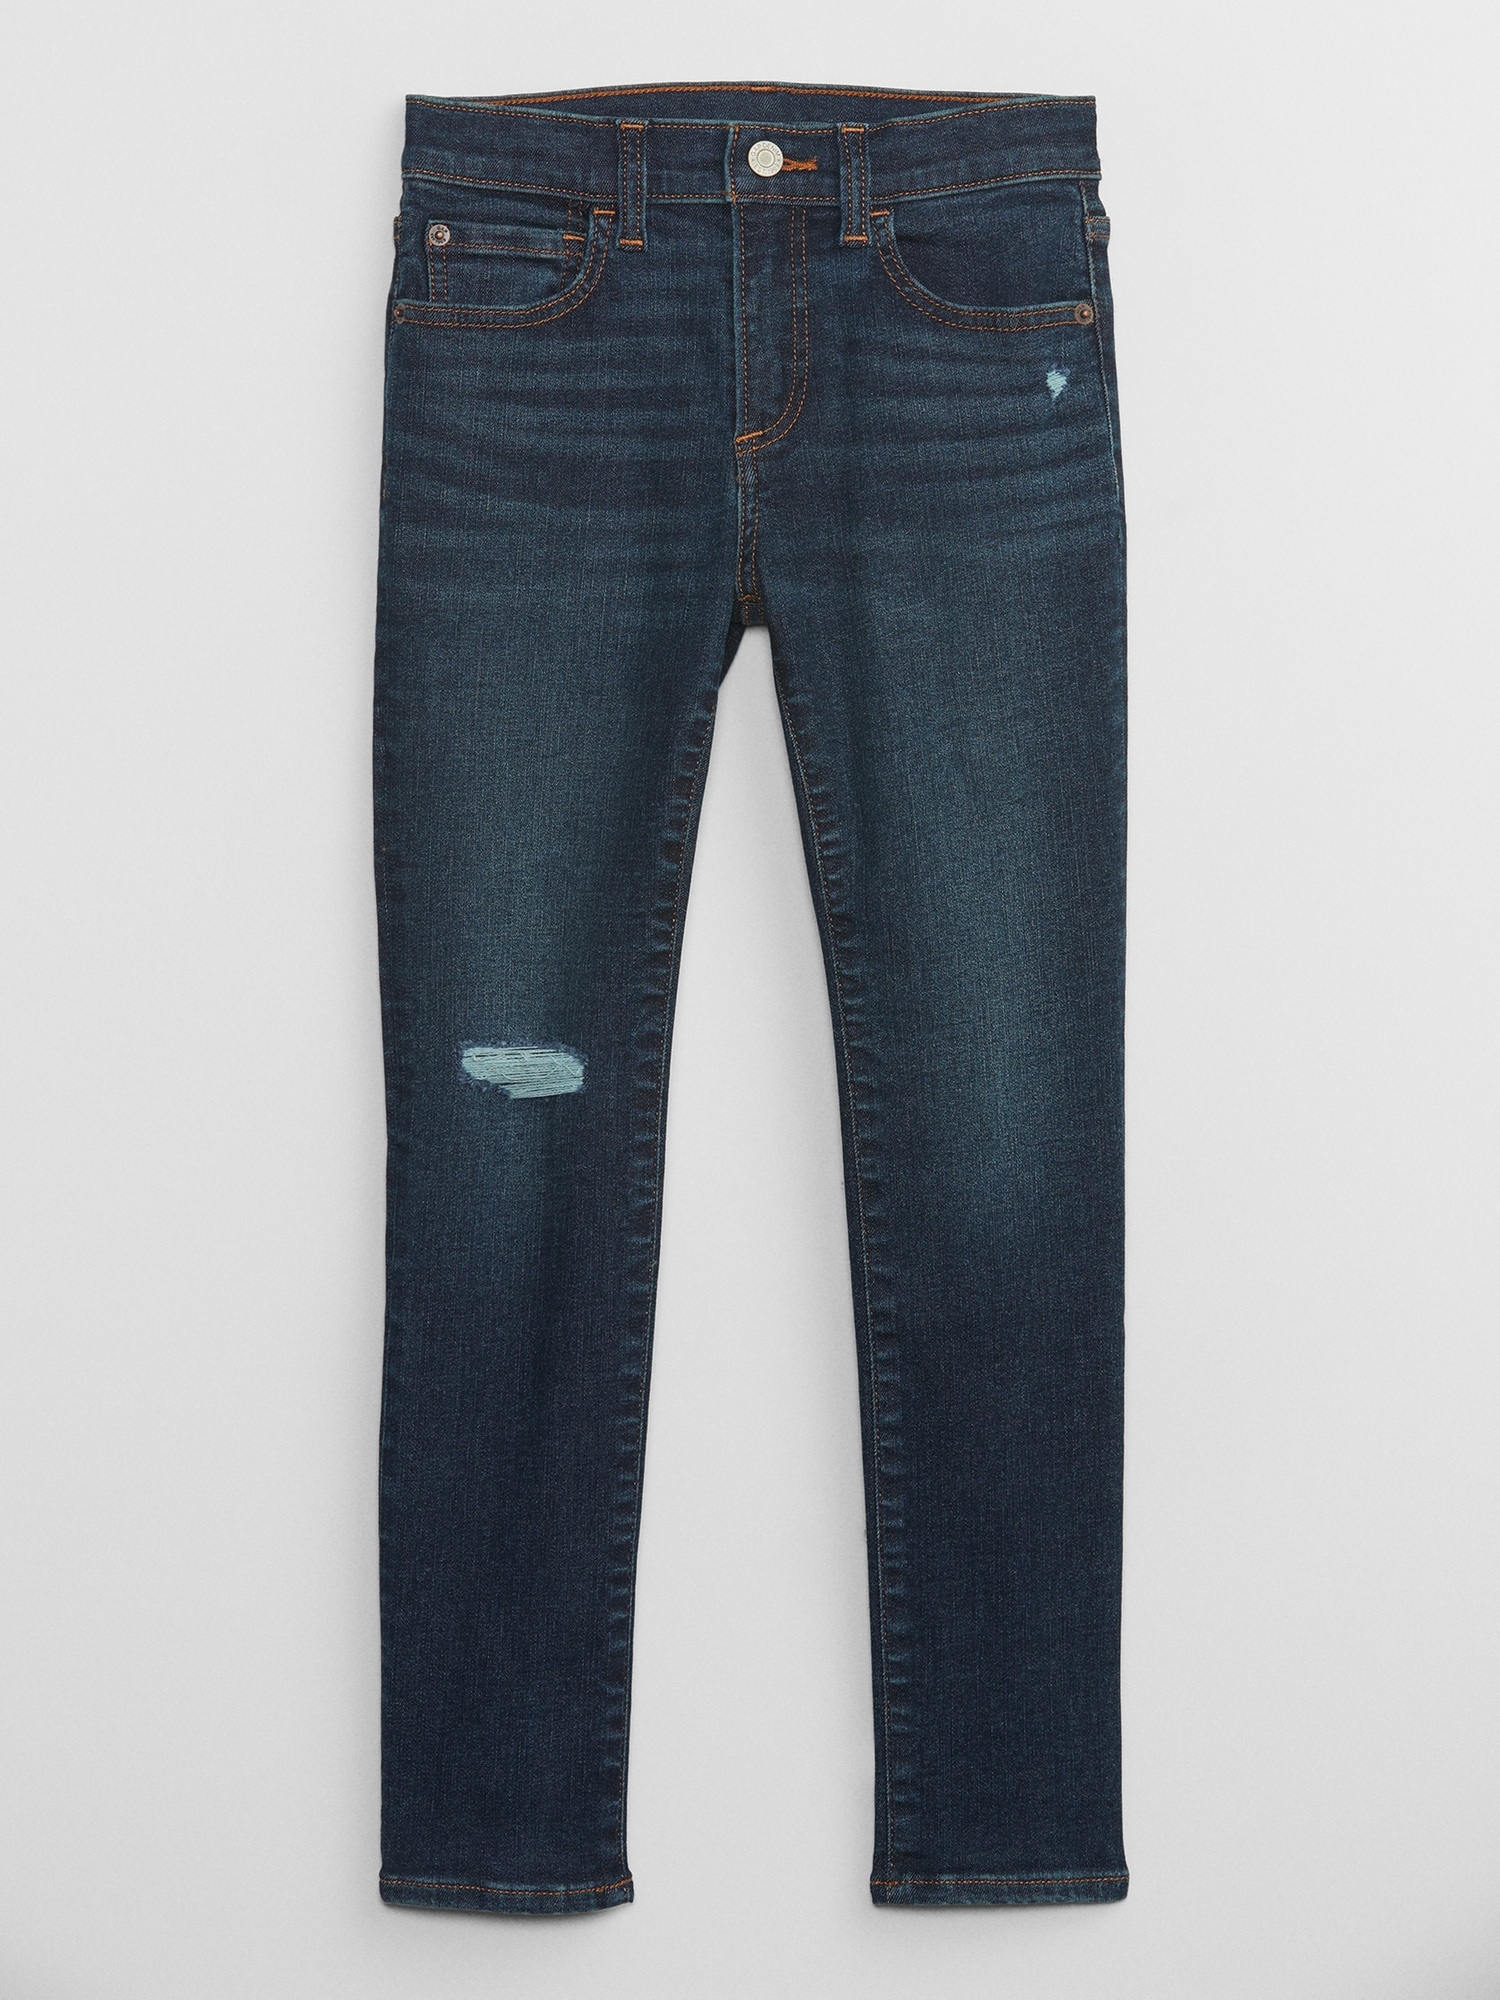 Kids Distressed Skinny Jeans with Washwell | Gap Factory